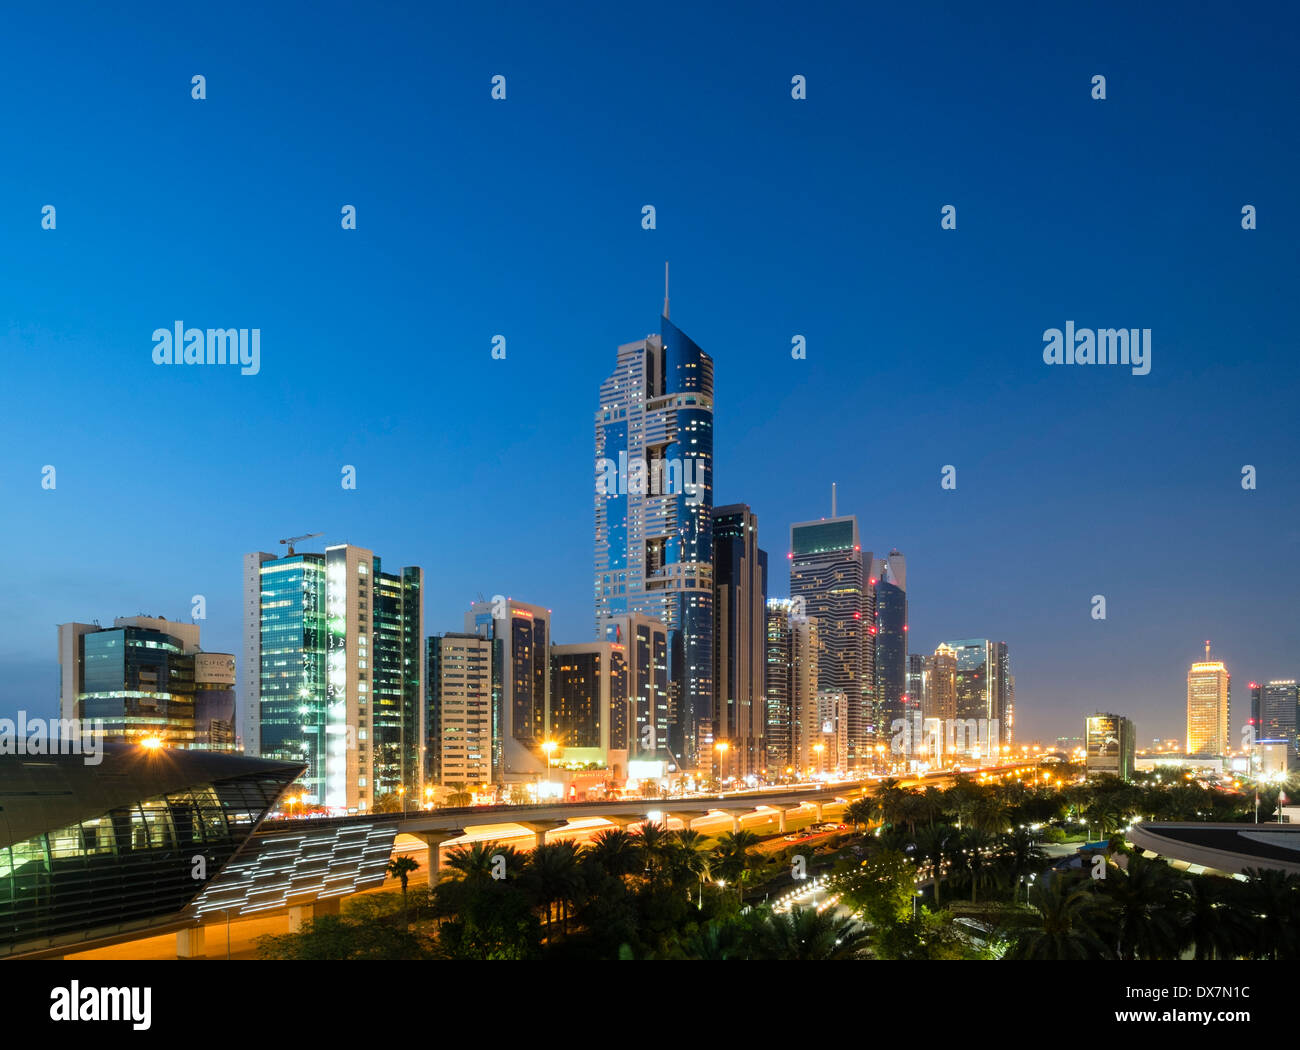 Dusk view of skyline of skyscrapers along Sheikh Zayed Road in Dubai United Arab Emirates Stock Photo